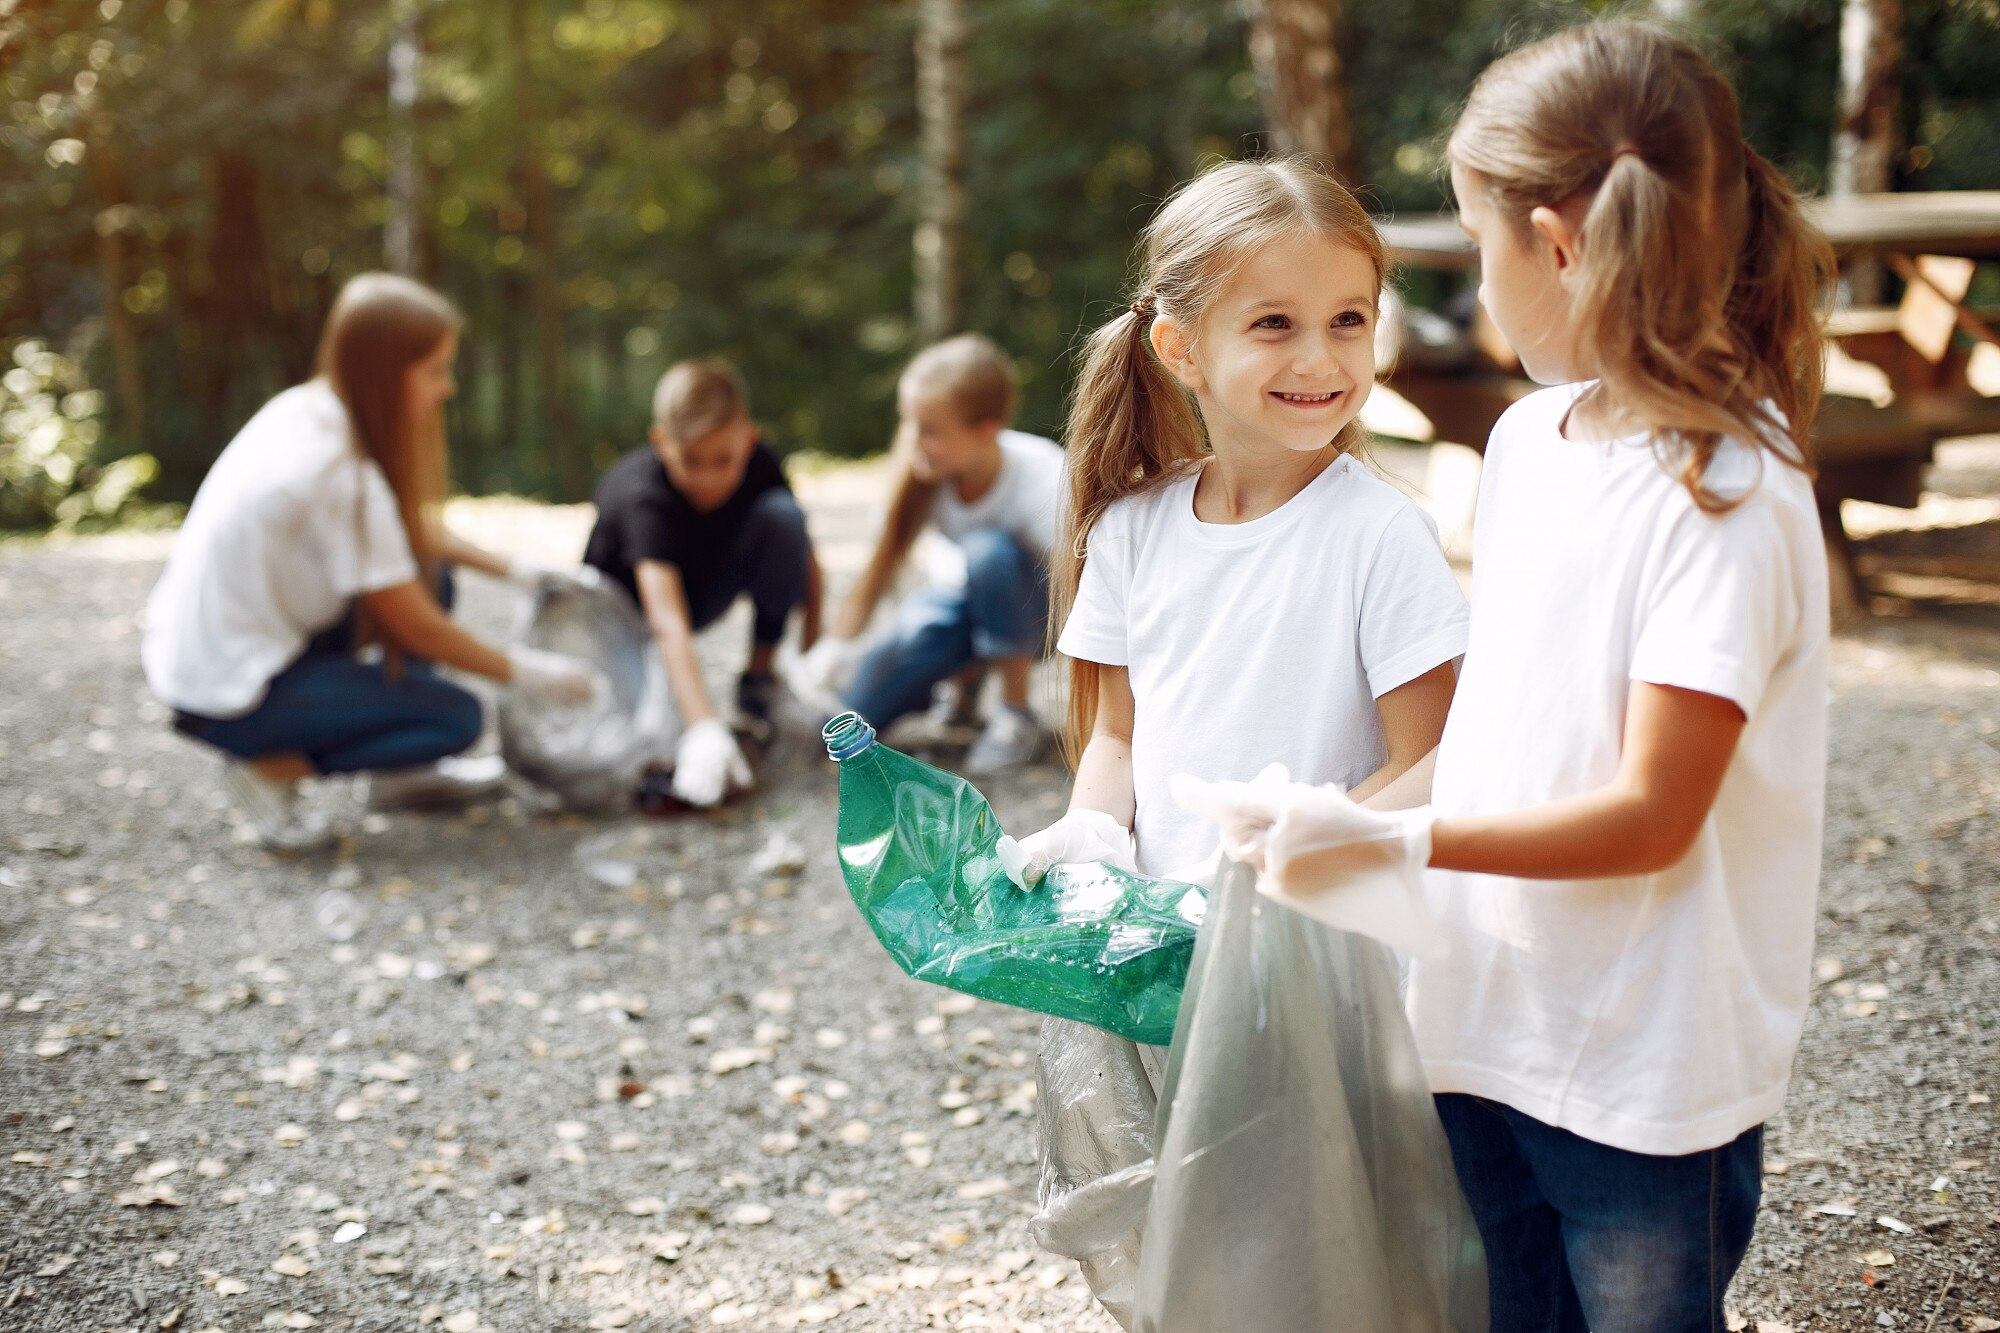 Children Participating in Cleaning Projects